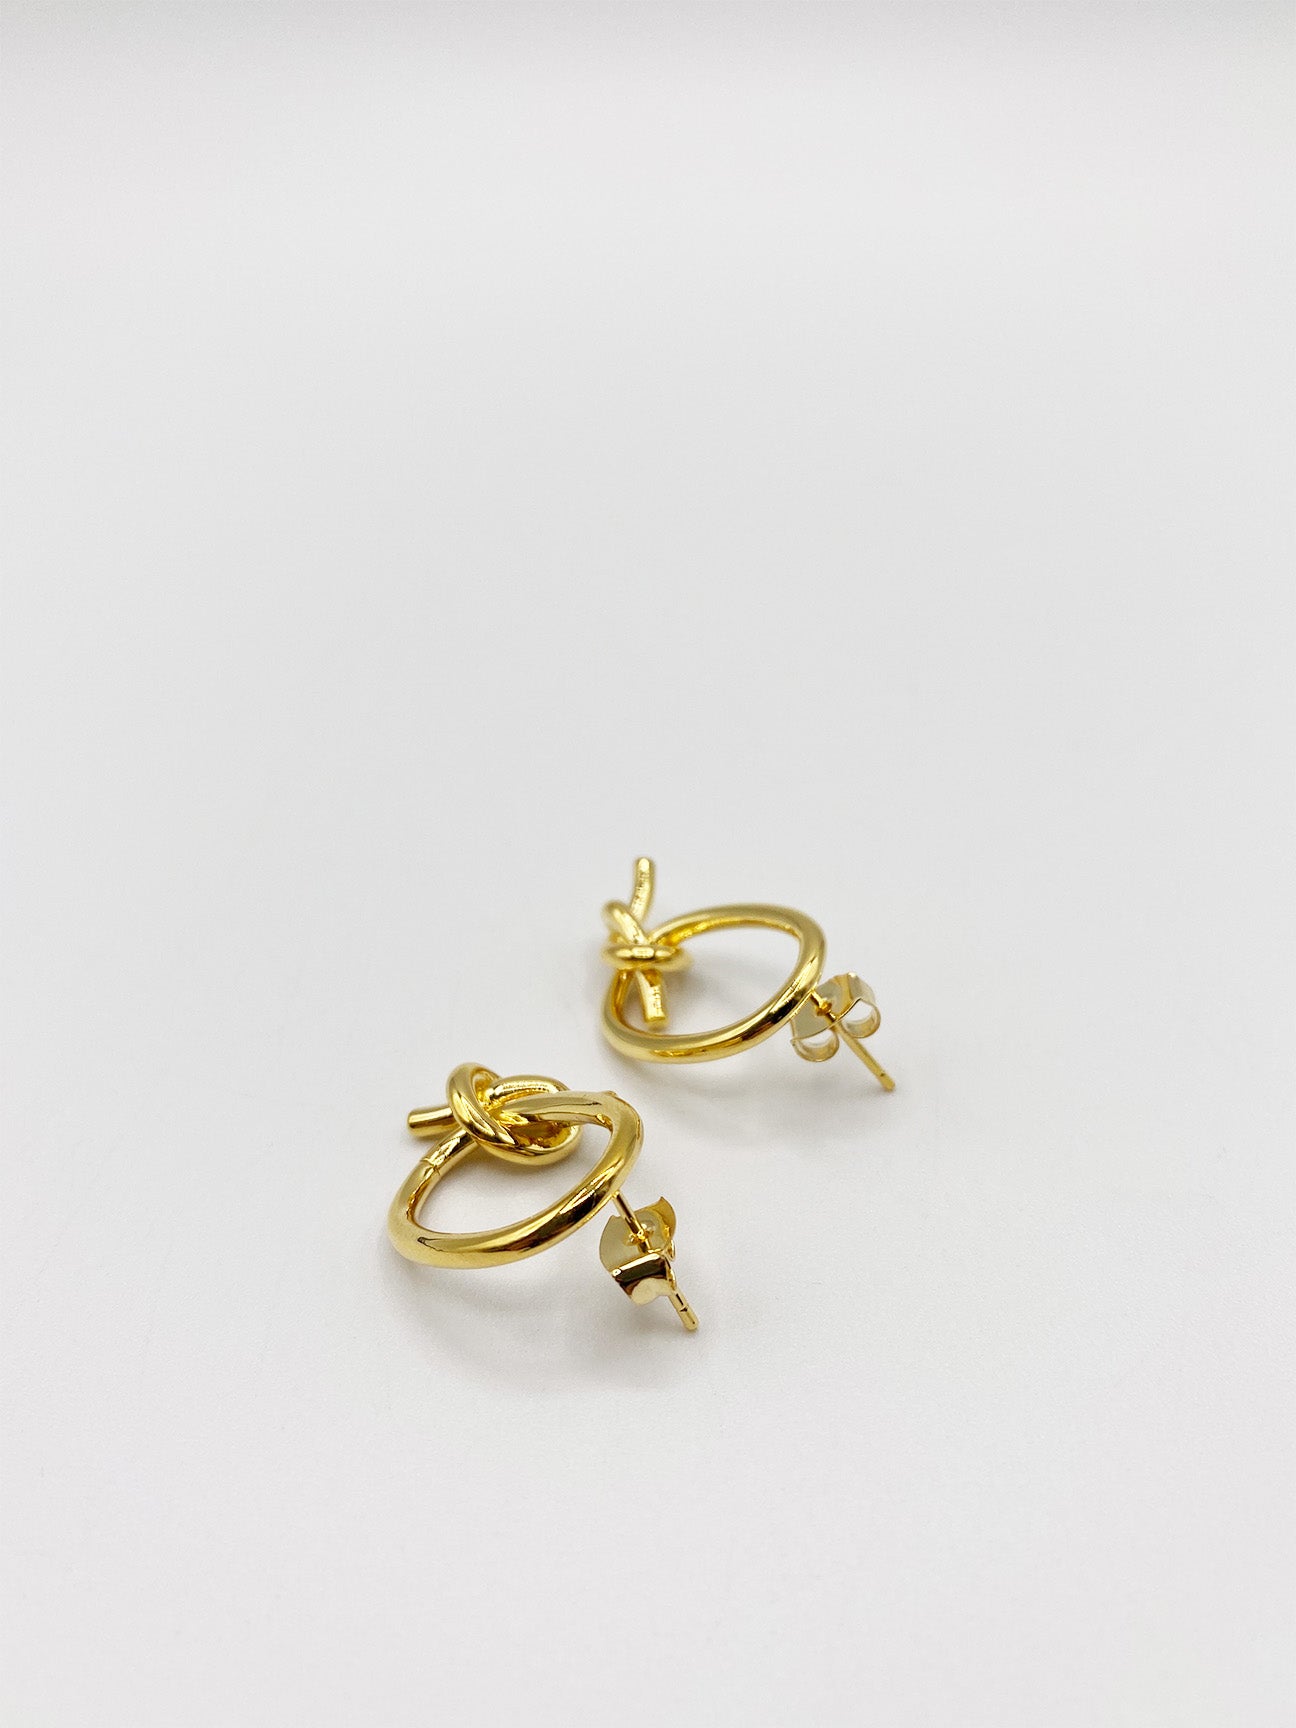 Gold Plated Earrings With Knot Detail